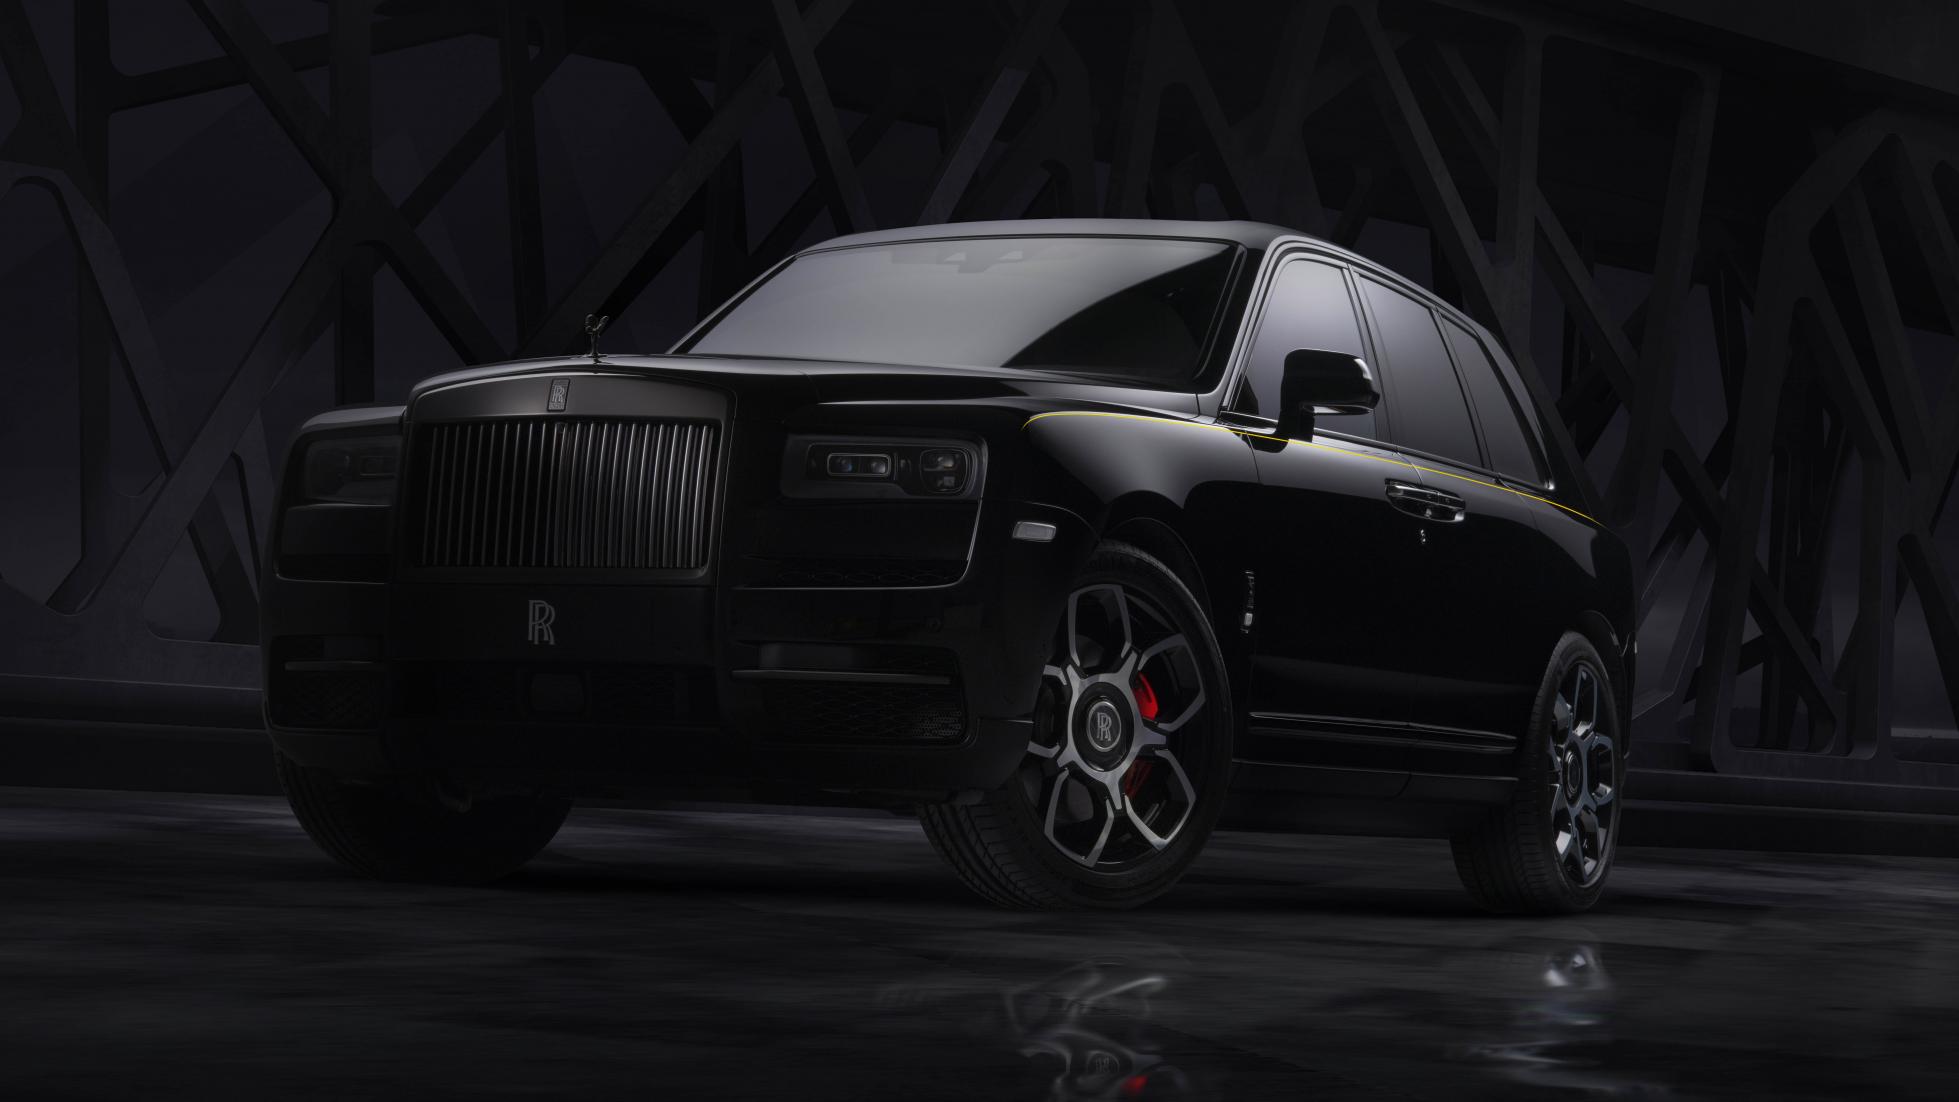 This Rolls-Royce Black Badge Cullinan gets more power